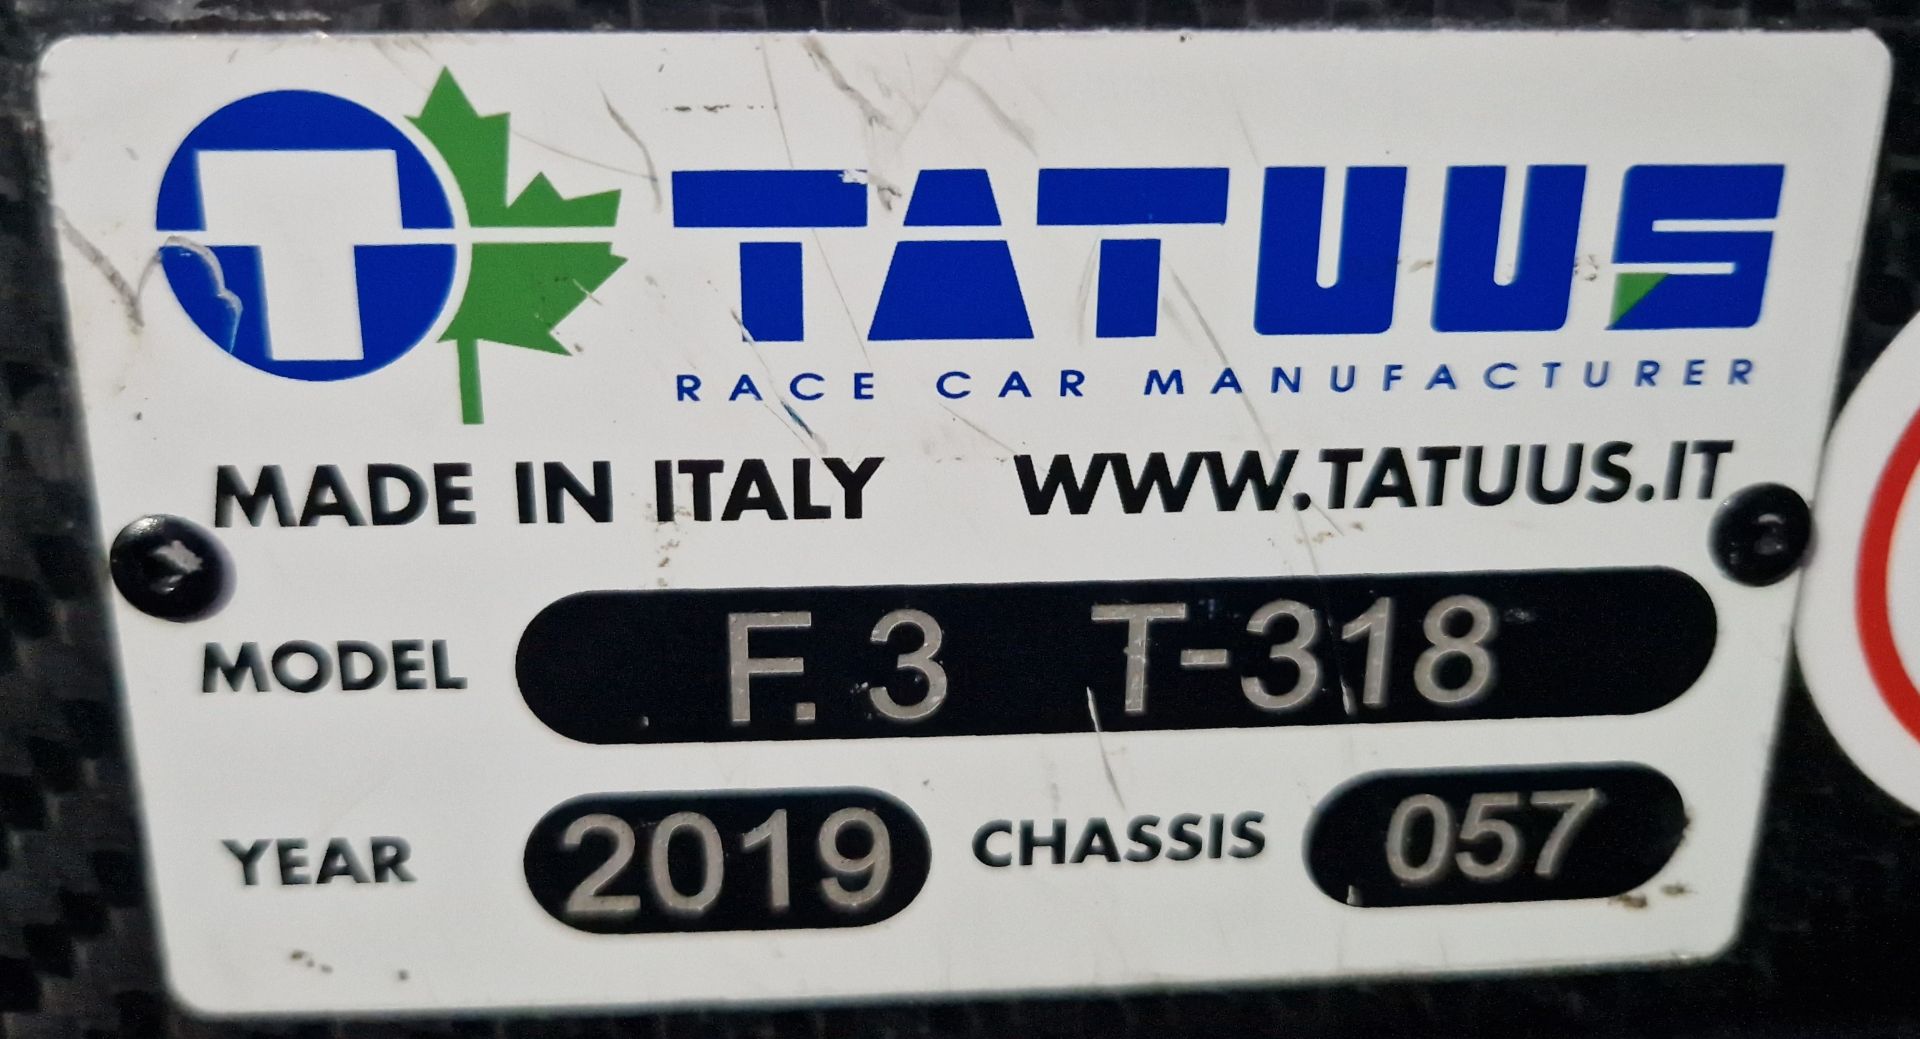 One TATUUS F3 T-318 Alfa Romeo Race Car Chassis No. 057 (2019) Finished in the W Series Academy - Image 6 of 10